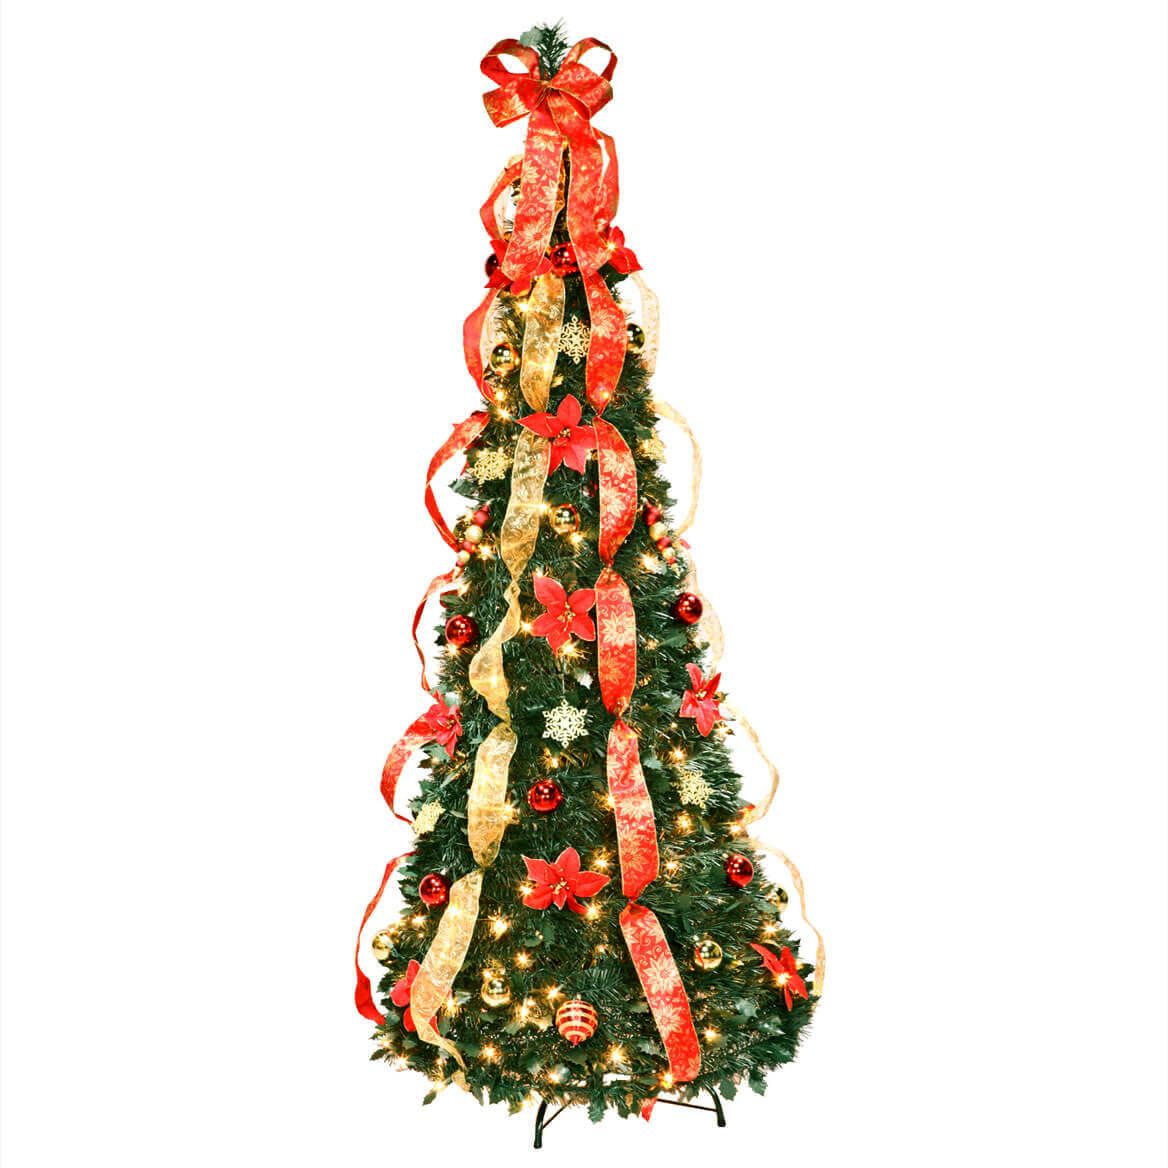 6' Red Poinsettia Pull-Up Tree by Holiday Peak™     XL + '-' + 356297